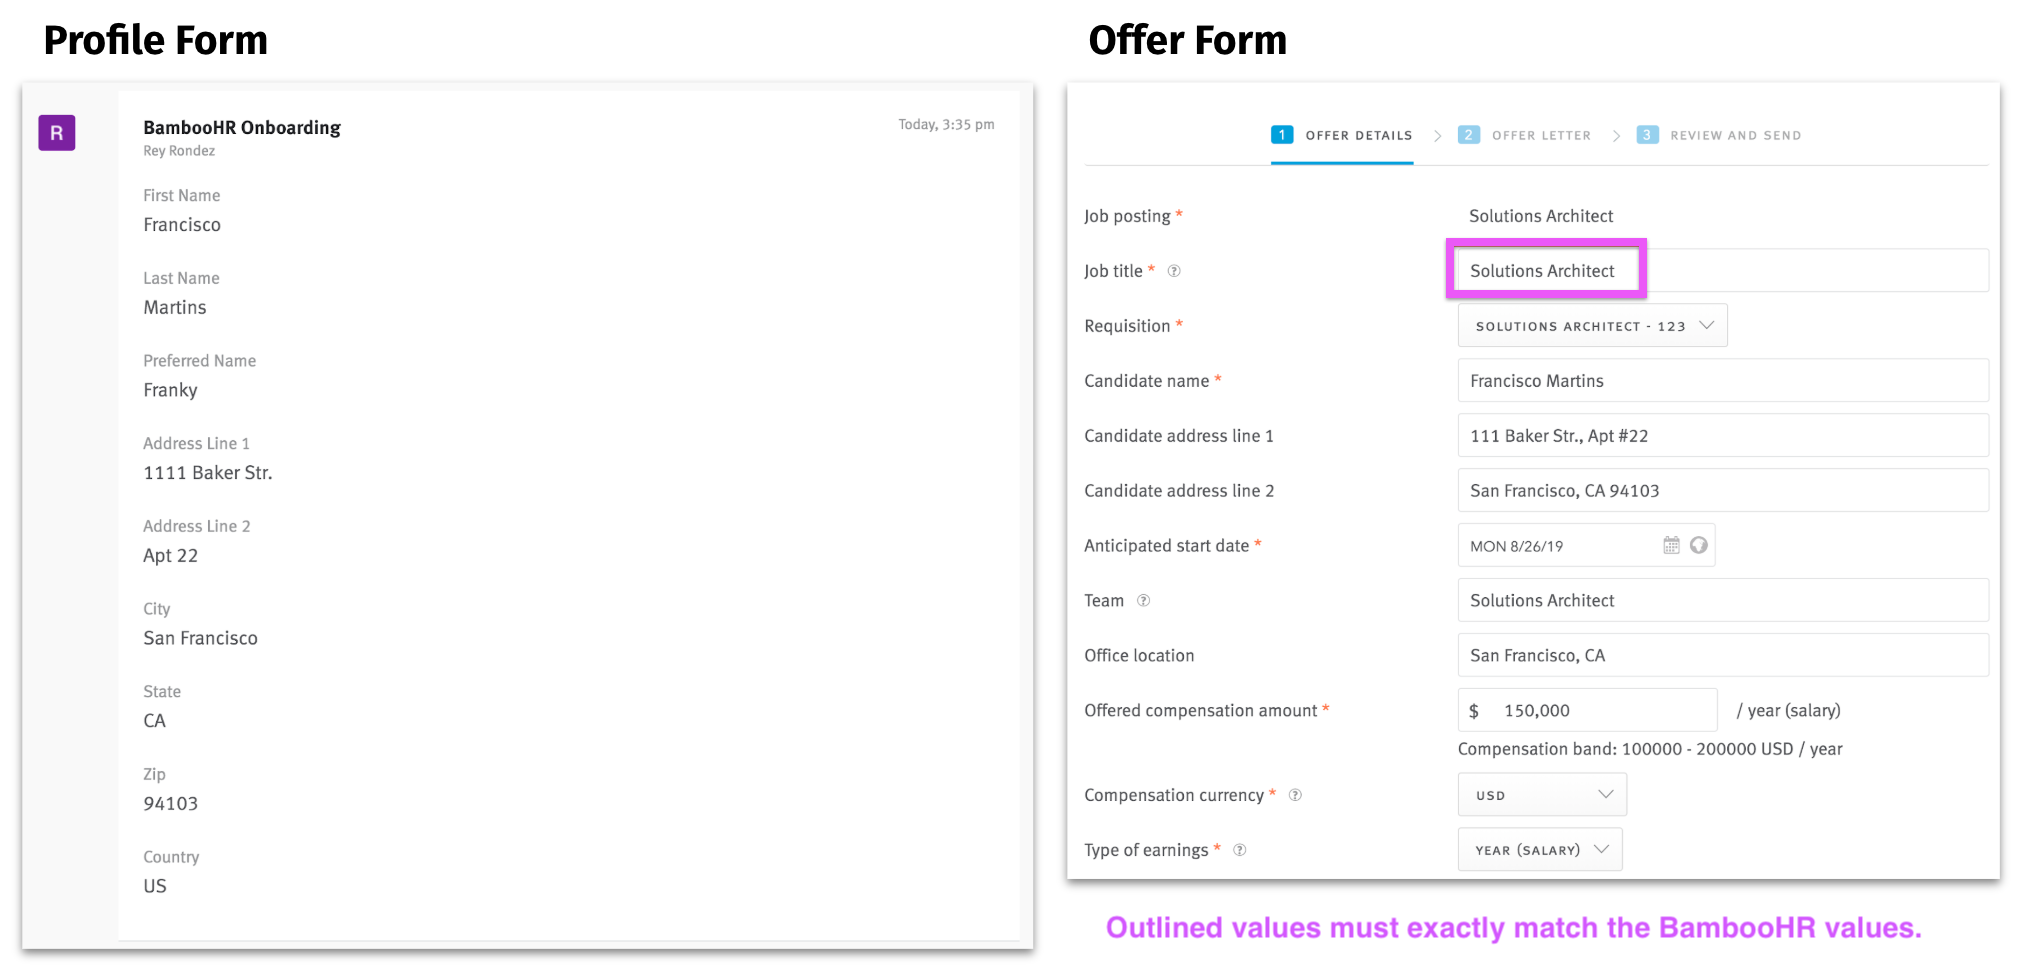 Lever Profile and Offer forms. Job title field is circled on Offer form. Note beneath image reads that outlined values must exactly match the BambooHR values.